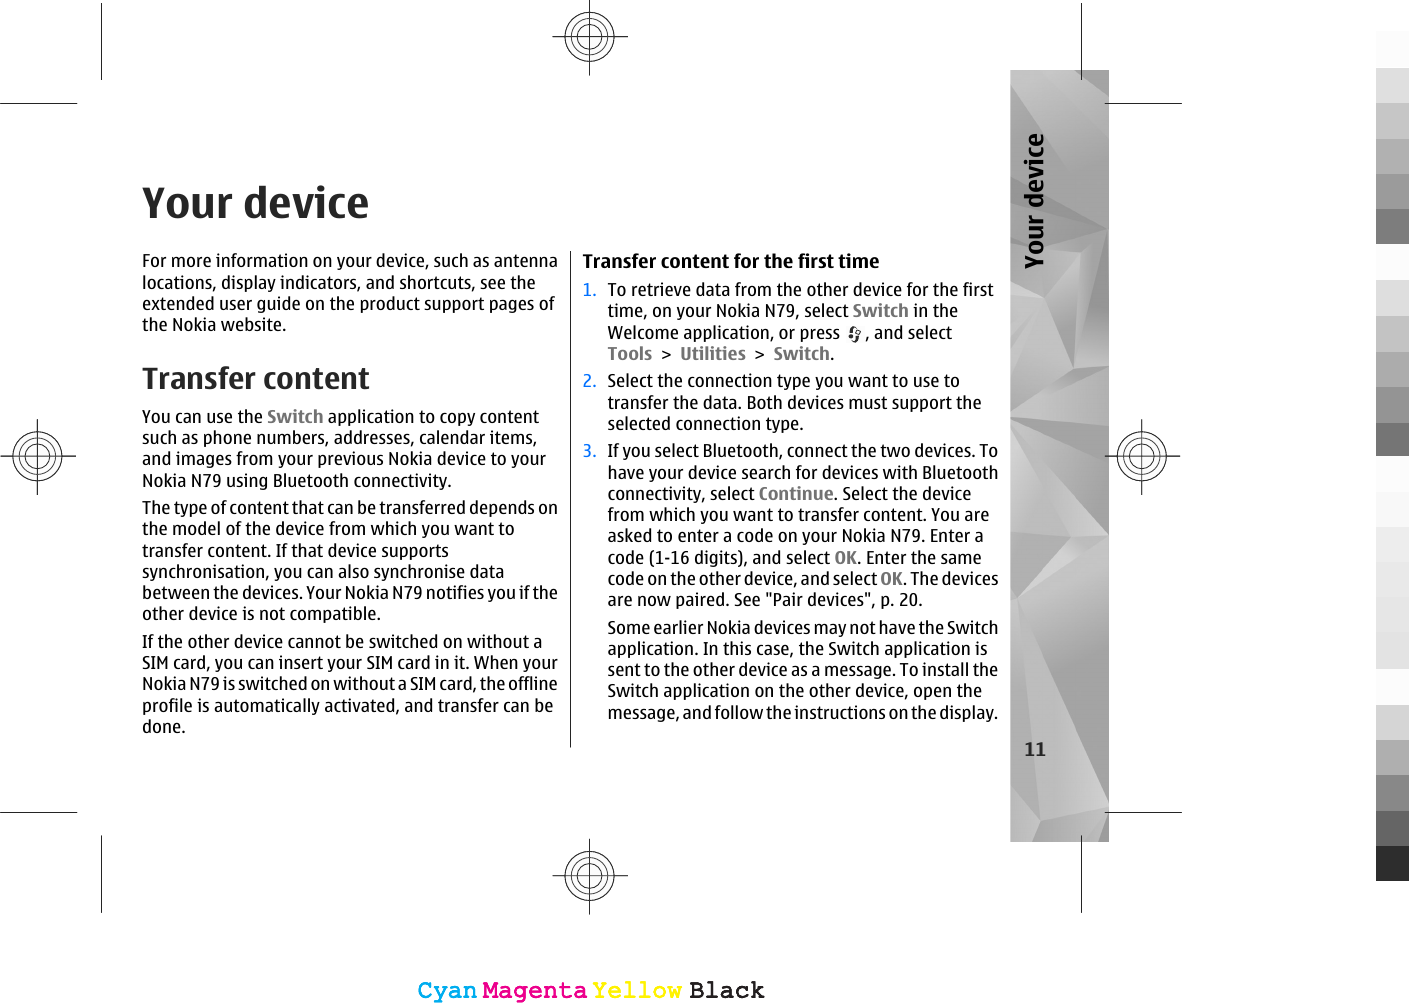 Your deviceFor more information on your device, such as antennalocations, display indicators, and shortcuts, see theextended user guide on the product support pages ofthe Nokia website.Transfer contentYou can use the Switch application to copy contentsuch as phone numbers, addresses, calendar items,and images from your previous Nokia device to yourNokia N79 using Bluetooth connectivity.The type of content that can be transferred depends onthe model of the device from which you want totransfer content. If that device supportssynchronisation, you can also synchronise databetween the devices. Your Nokia N79 notifies you if theother device is not compatible.If the other device cannot be switched on without aSIM card, you can insert your SIM card in it. When yourNokia N79 is switched on without a SIM card, the offlineprofile is automatically activated, and transfer can bedone.Transfer content for the first time1. To retrieve data from the other device for the firsttime, on your Nokia N79, select Switch in theWelcome application, or press  , and selectTools &gt; Utilities &gt; Switch.2. Select the connection type you want to use totransfer the data. Both devices must support theselected connection type.3. If you select Bluetooth, connect the two devices. Tohave your device search for devices with Bluetoothconnectivity, select Continue. Select the devicefrom which you want to transfer content. You areasked to enter a code on your Nokia N79. Enter acode (1-16 digits), and select OK. Enter the samecode on the other device, and select OK. The devicesare now paired. See &quot;Pair devices&quot;, p. 20.Some earlier Nokia devices may not have the Switchapplication. In this case, the Switch application issent to the other device as a message. To install theSwitch application on the other device, open themessage, and follow the instructions on the display.11Your deviceCyanCyanMagentaMagentaYellowYellowBlackBlackCyanCyanMagentaMagentaYellowYellowBlackBlack